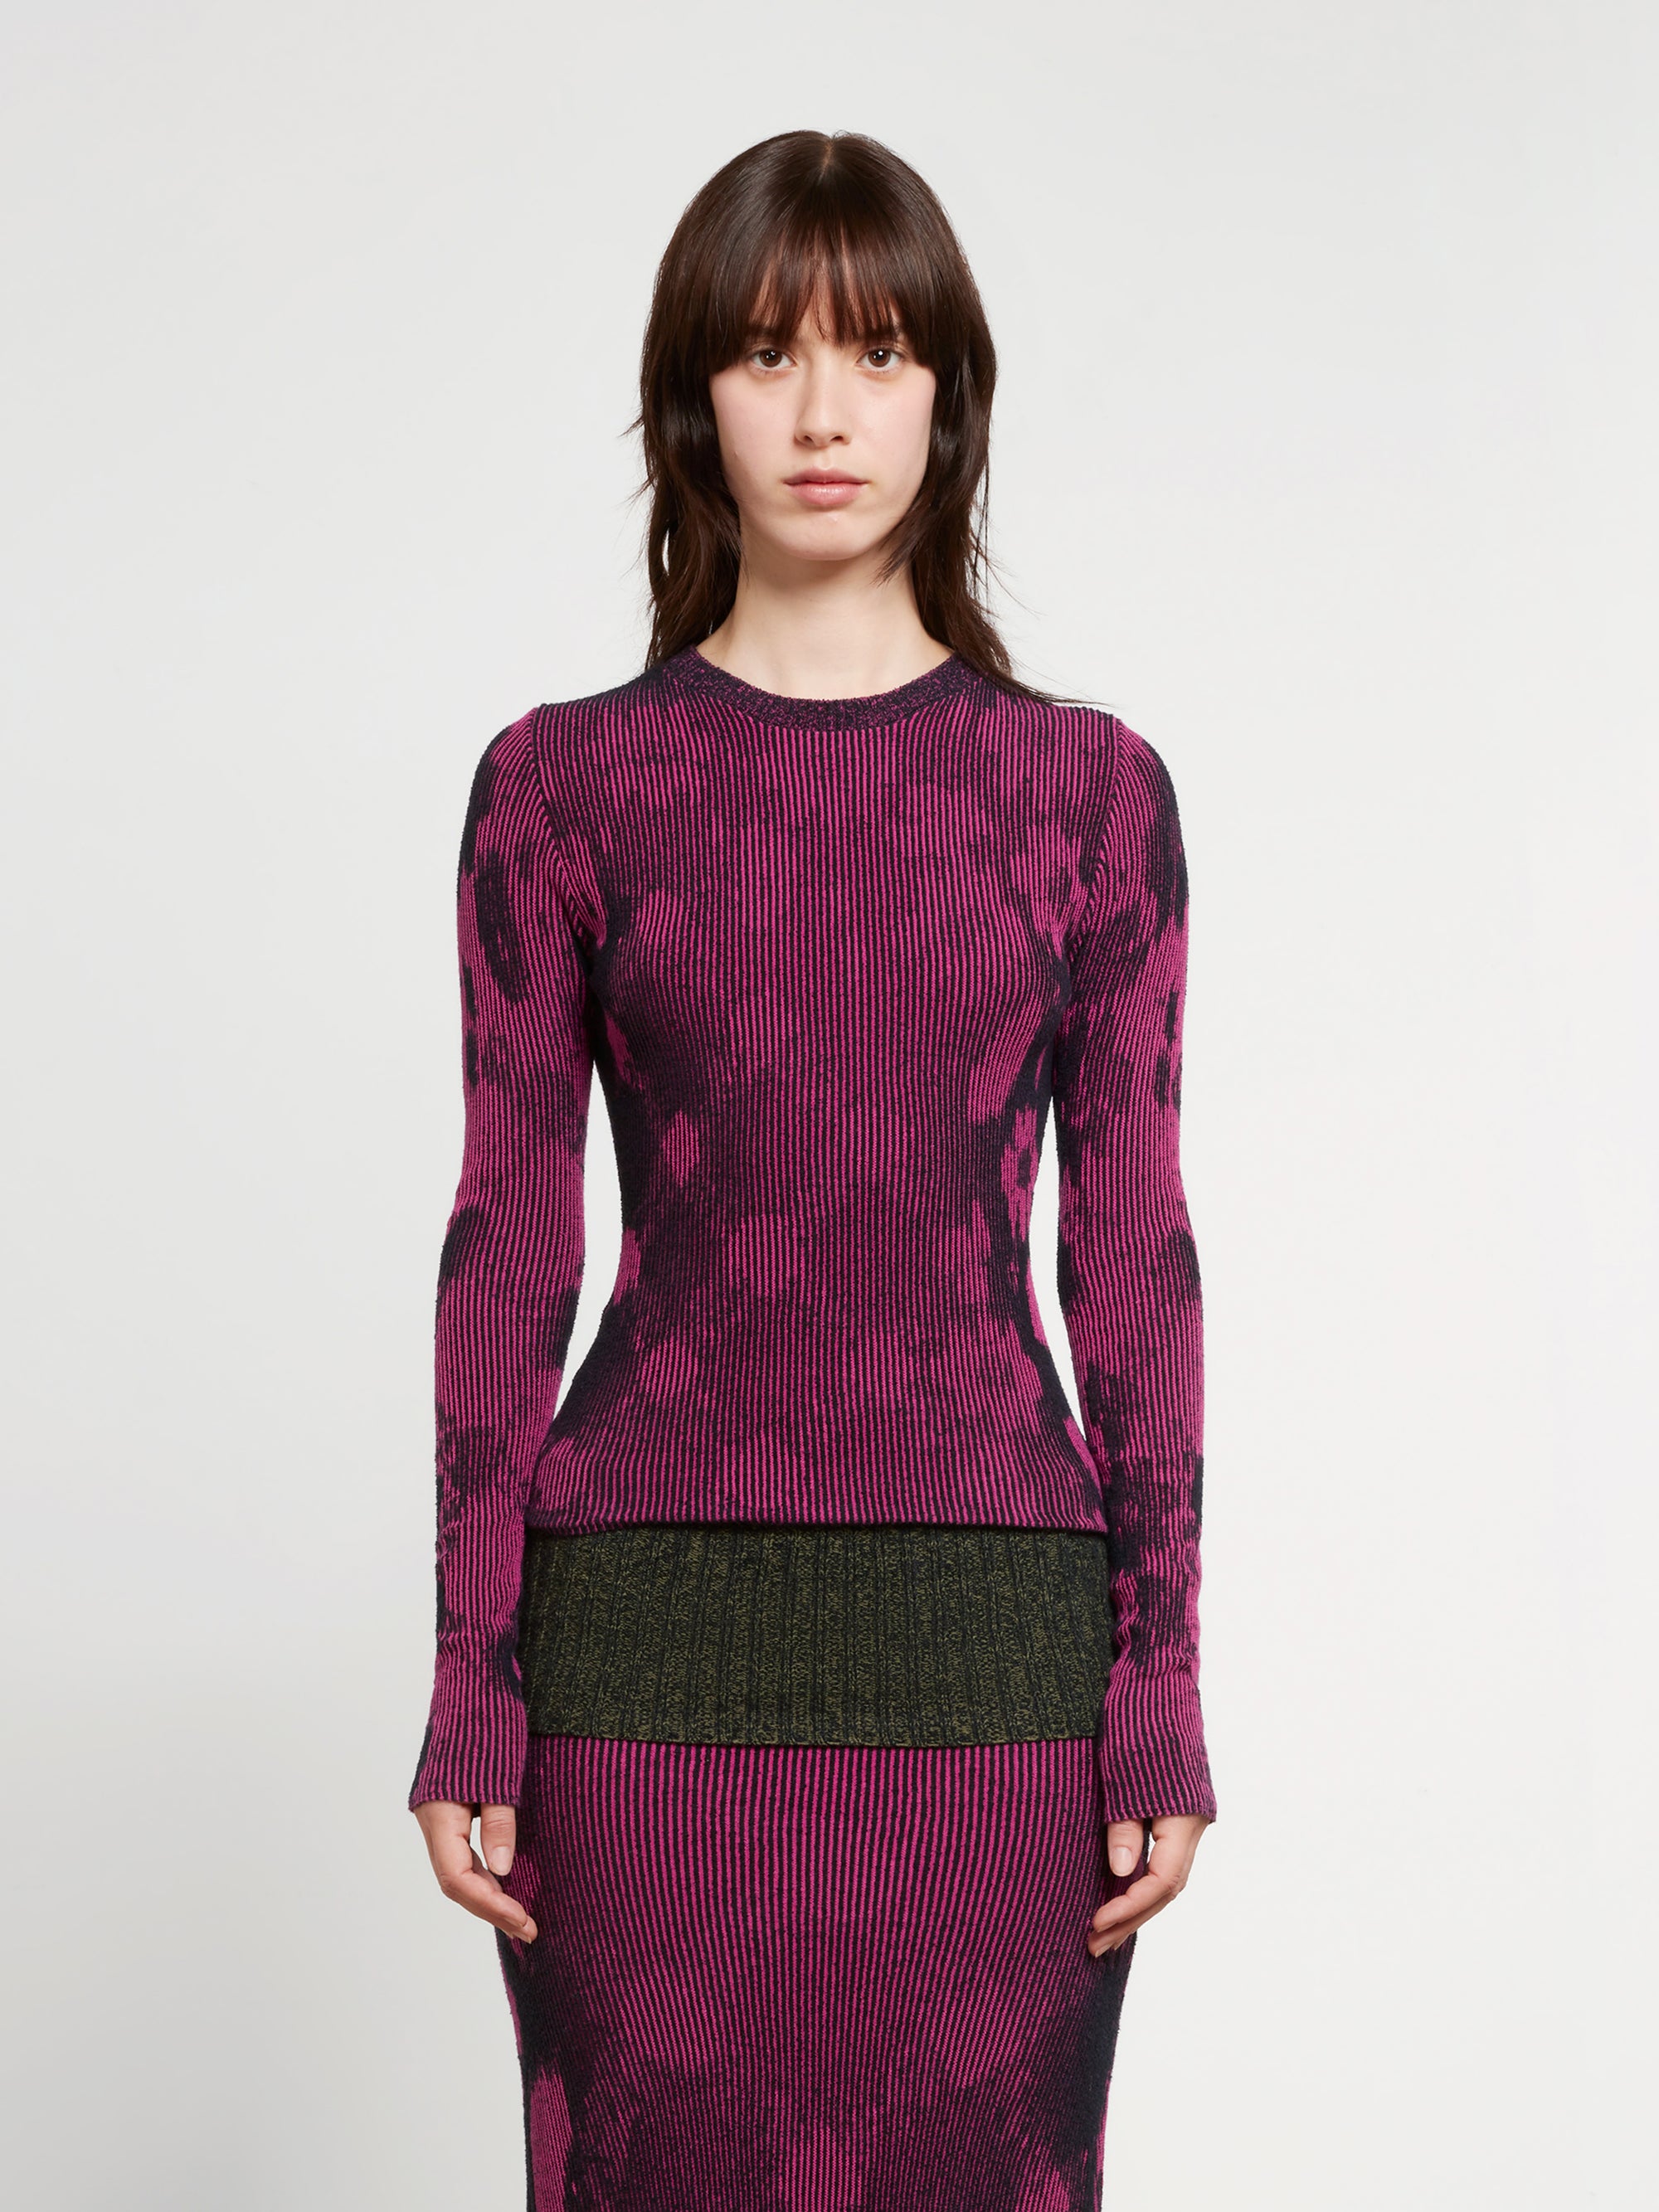 Paolina Russo - Women’s Illusion Knit Long Sleeve Top - (Magenta/Black) view 1